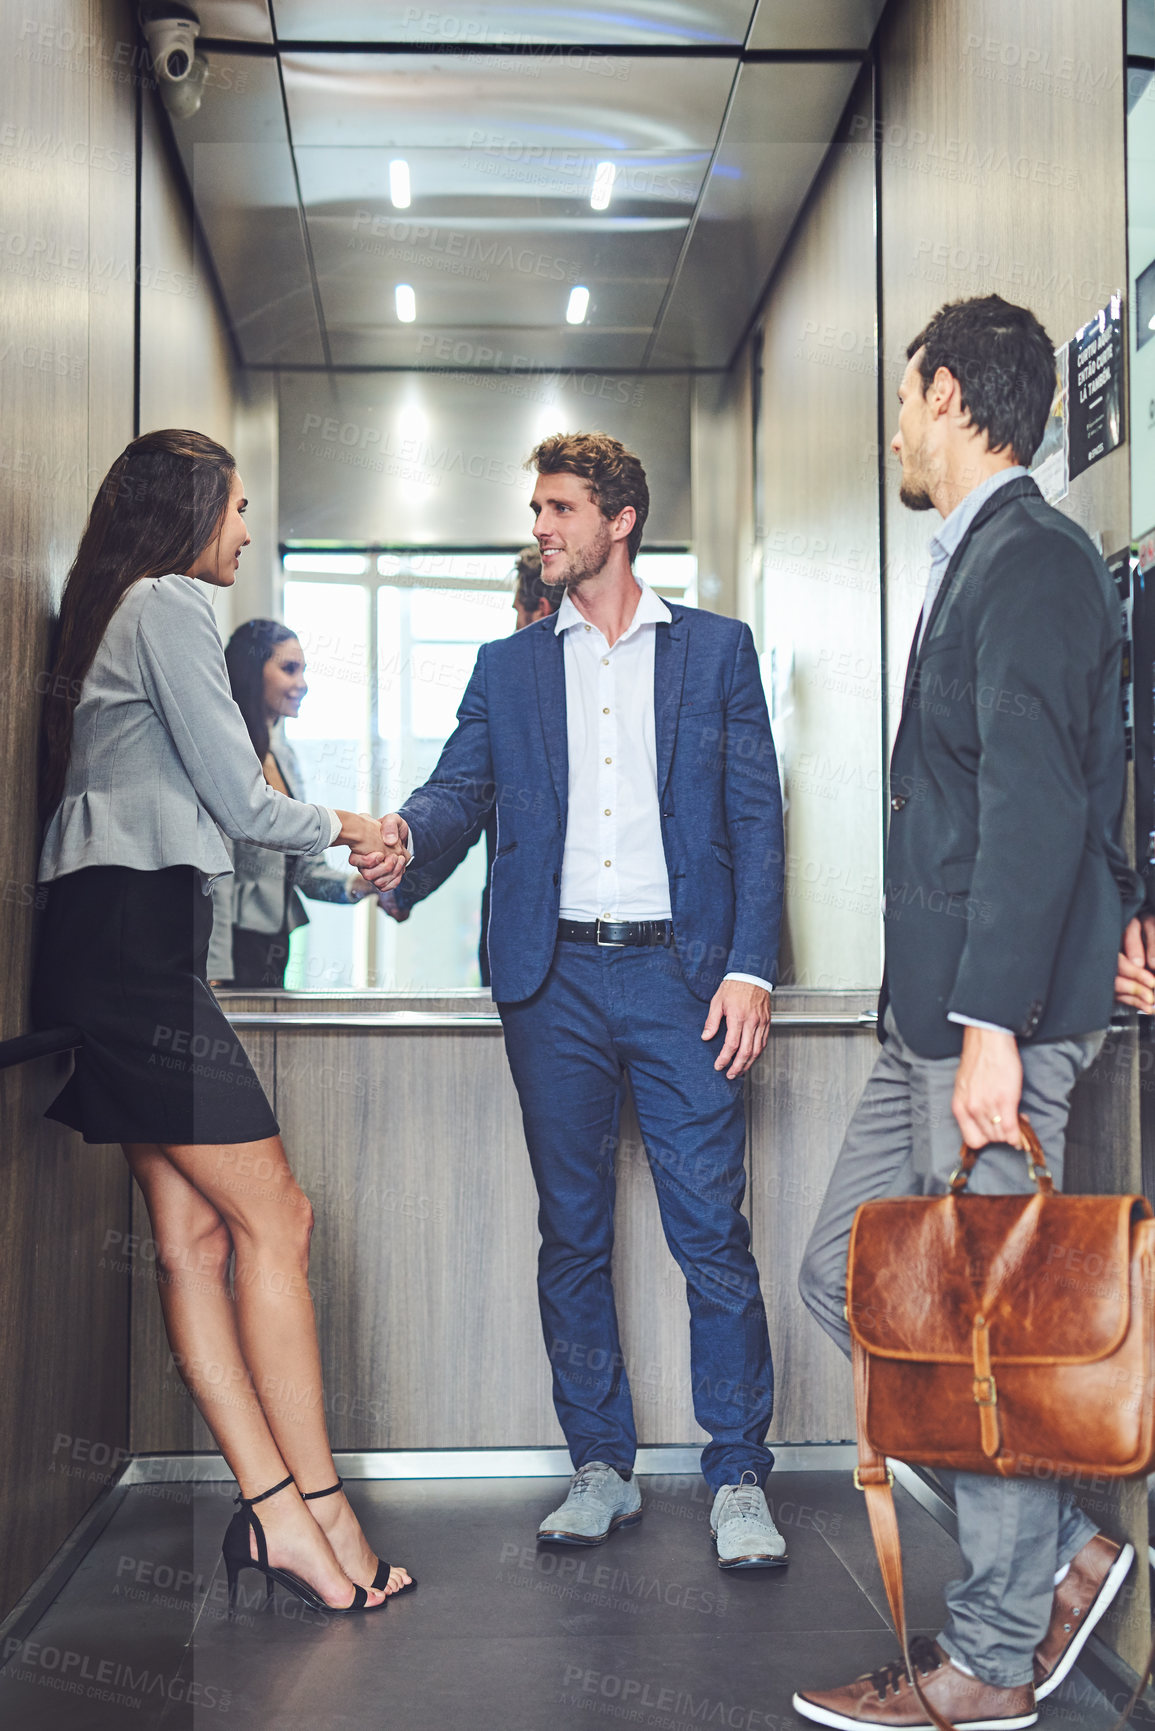 Buy stock photo Shot of businesspeople meeting and greeting in an elevator